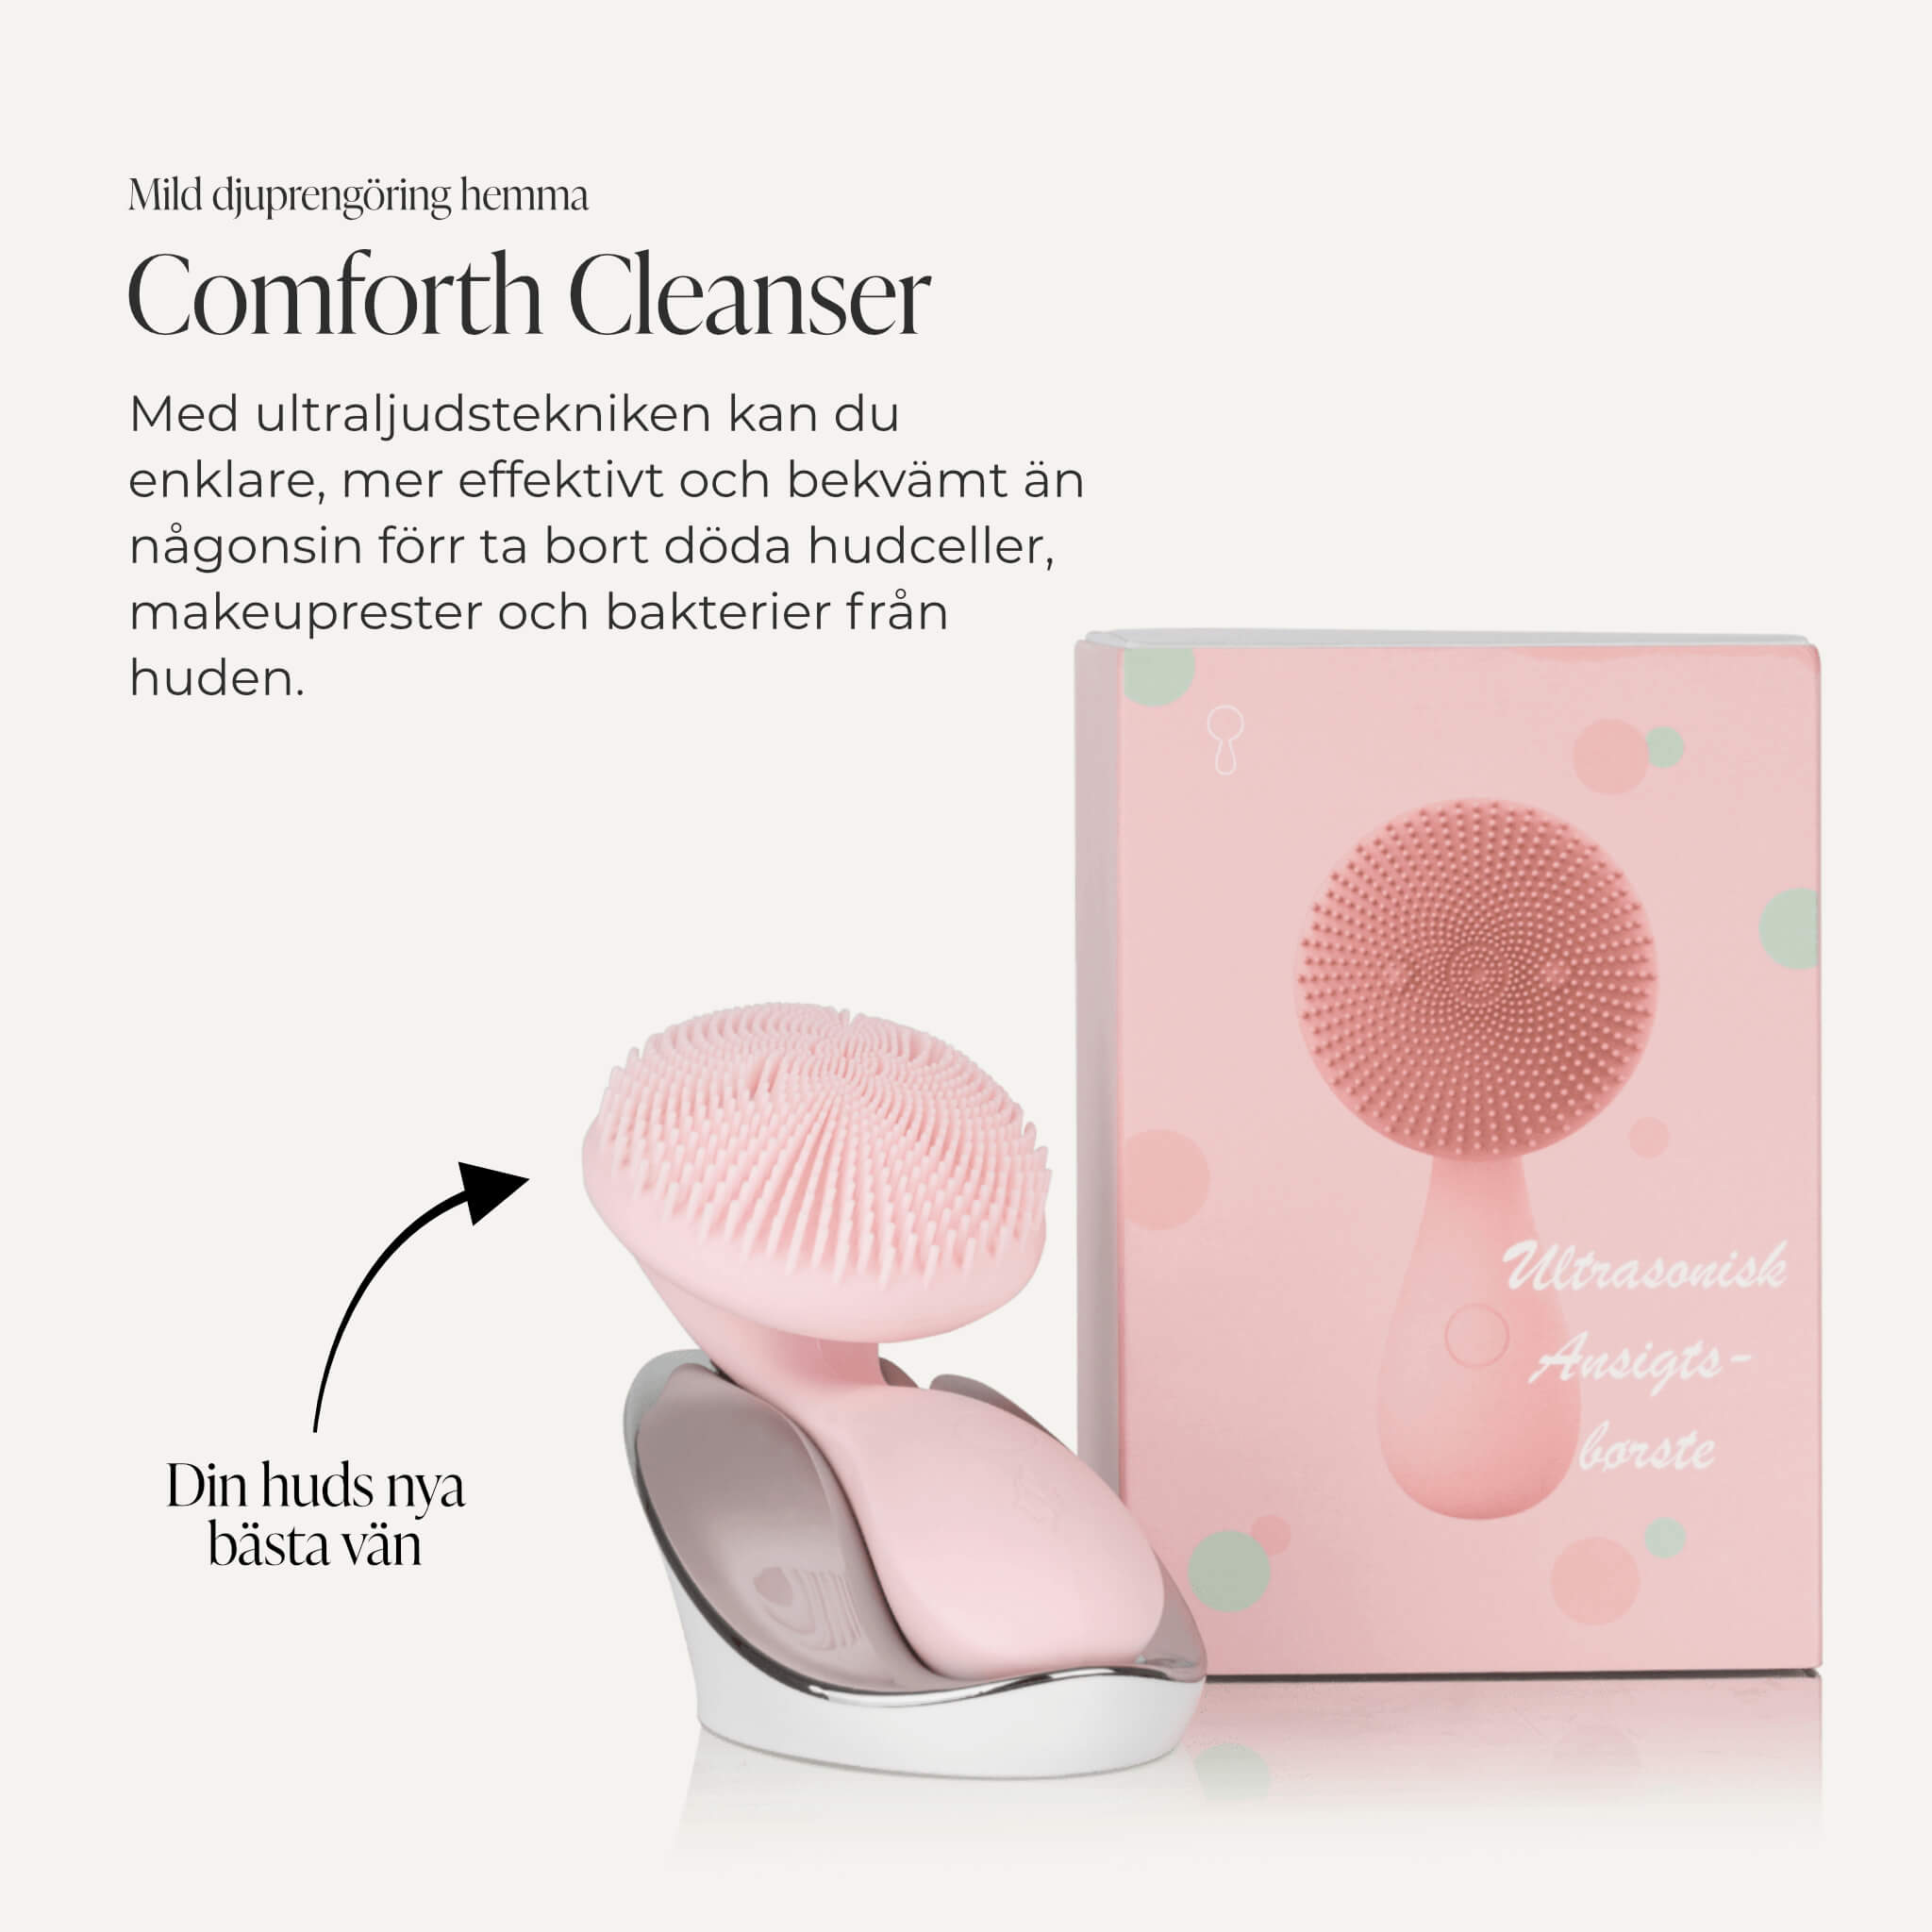 Comforth Cleanser